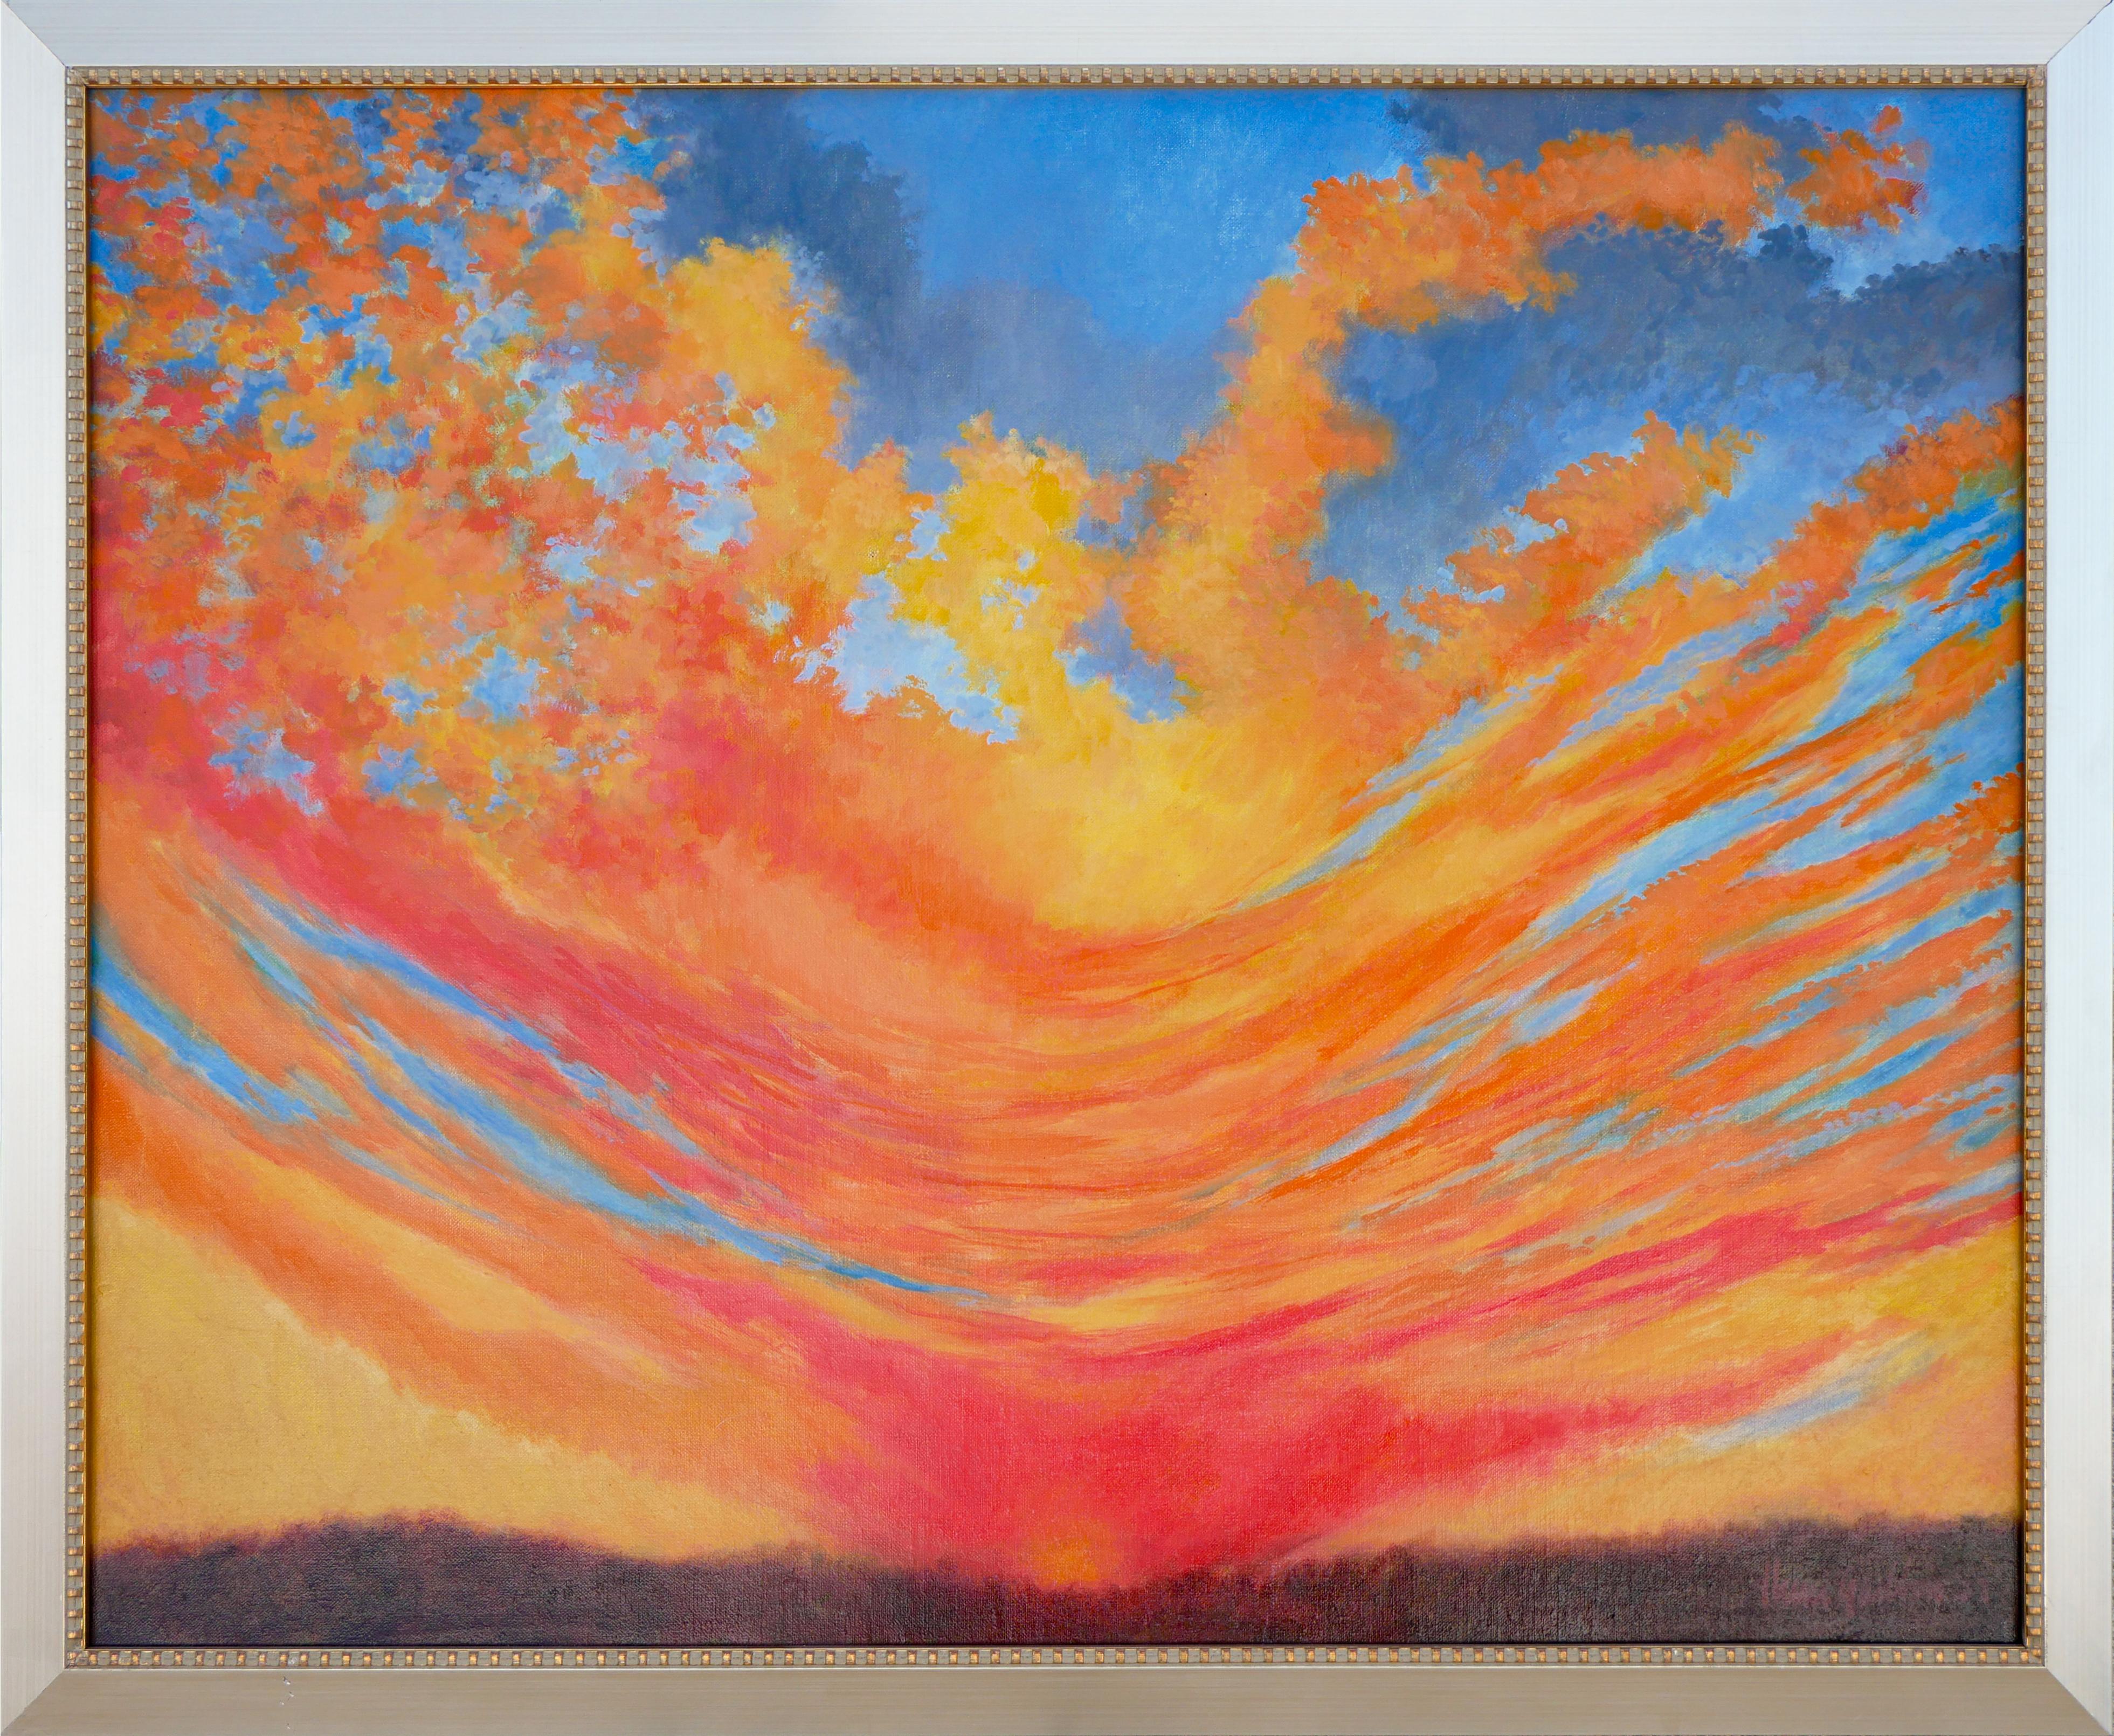 Henri Gadbois Abstract Print - Blue, Orange, and Yellow Abstract Expressionist Sunset Landscape